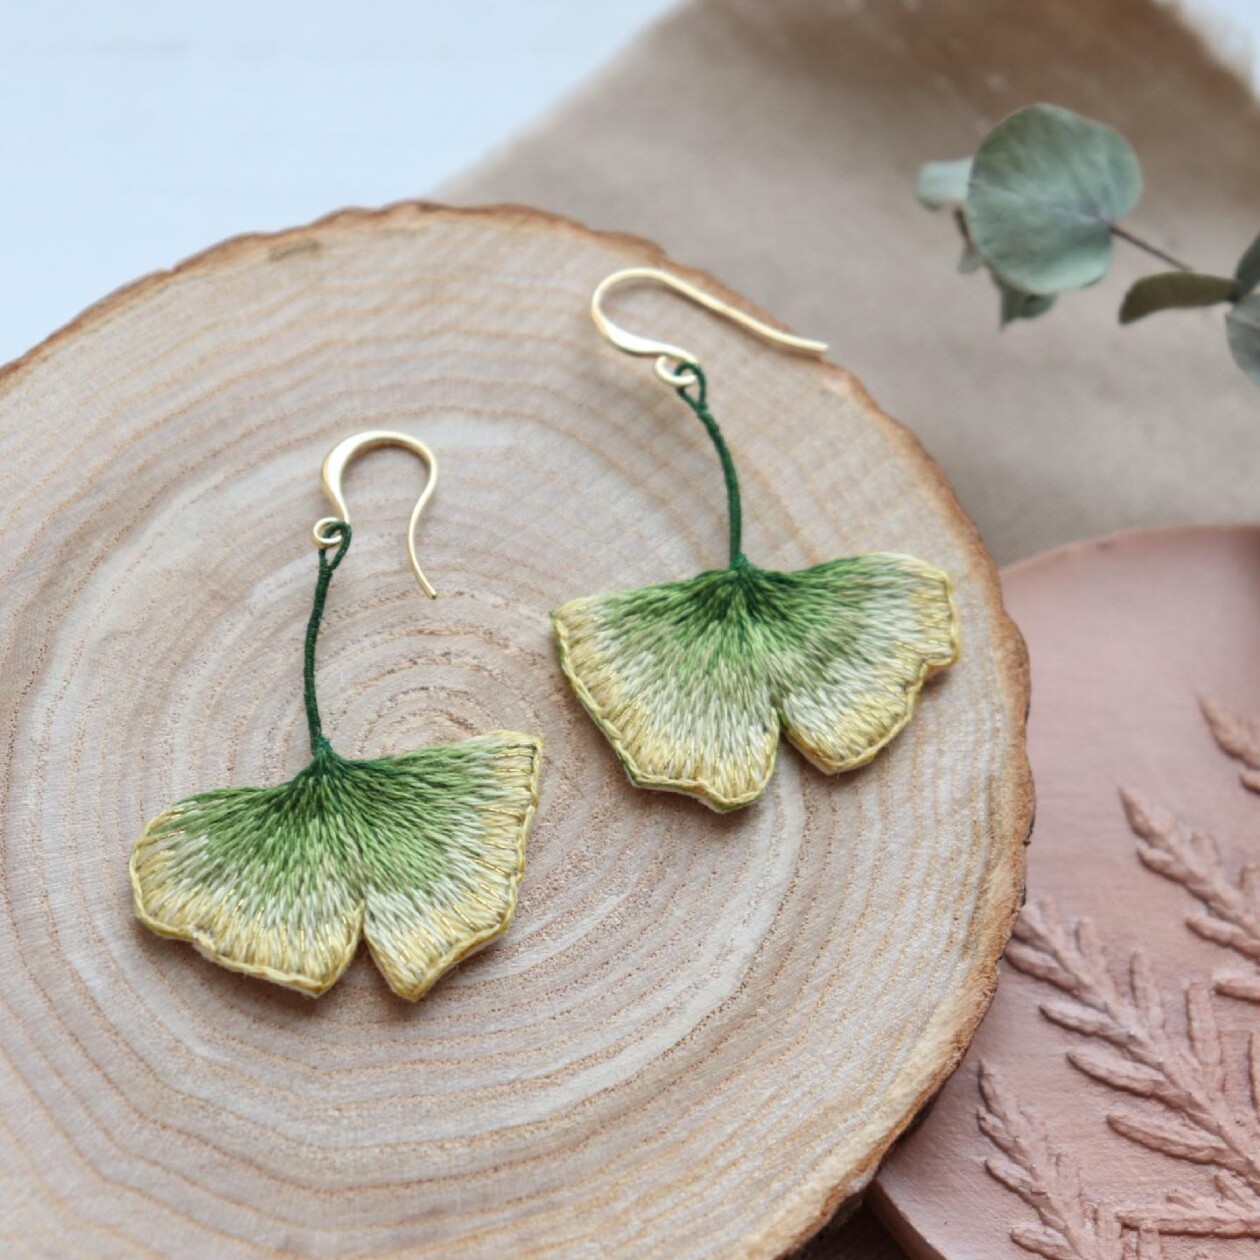 Eye Catching Handmade Embroidered Earrings By Vivaembr (4)